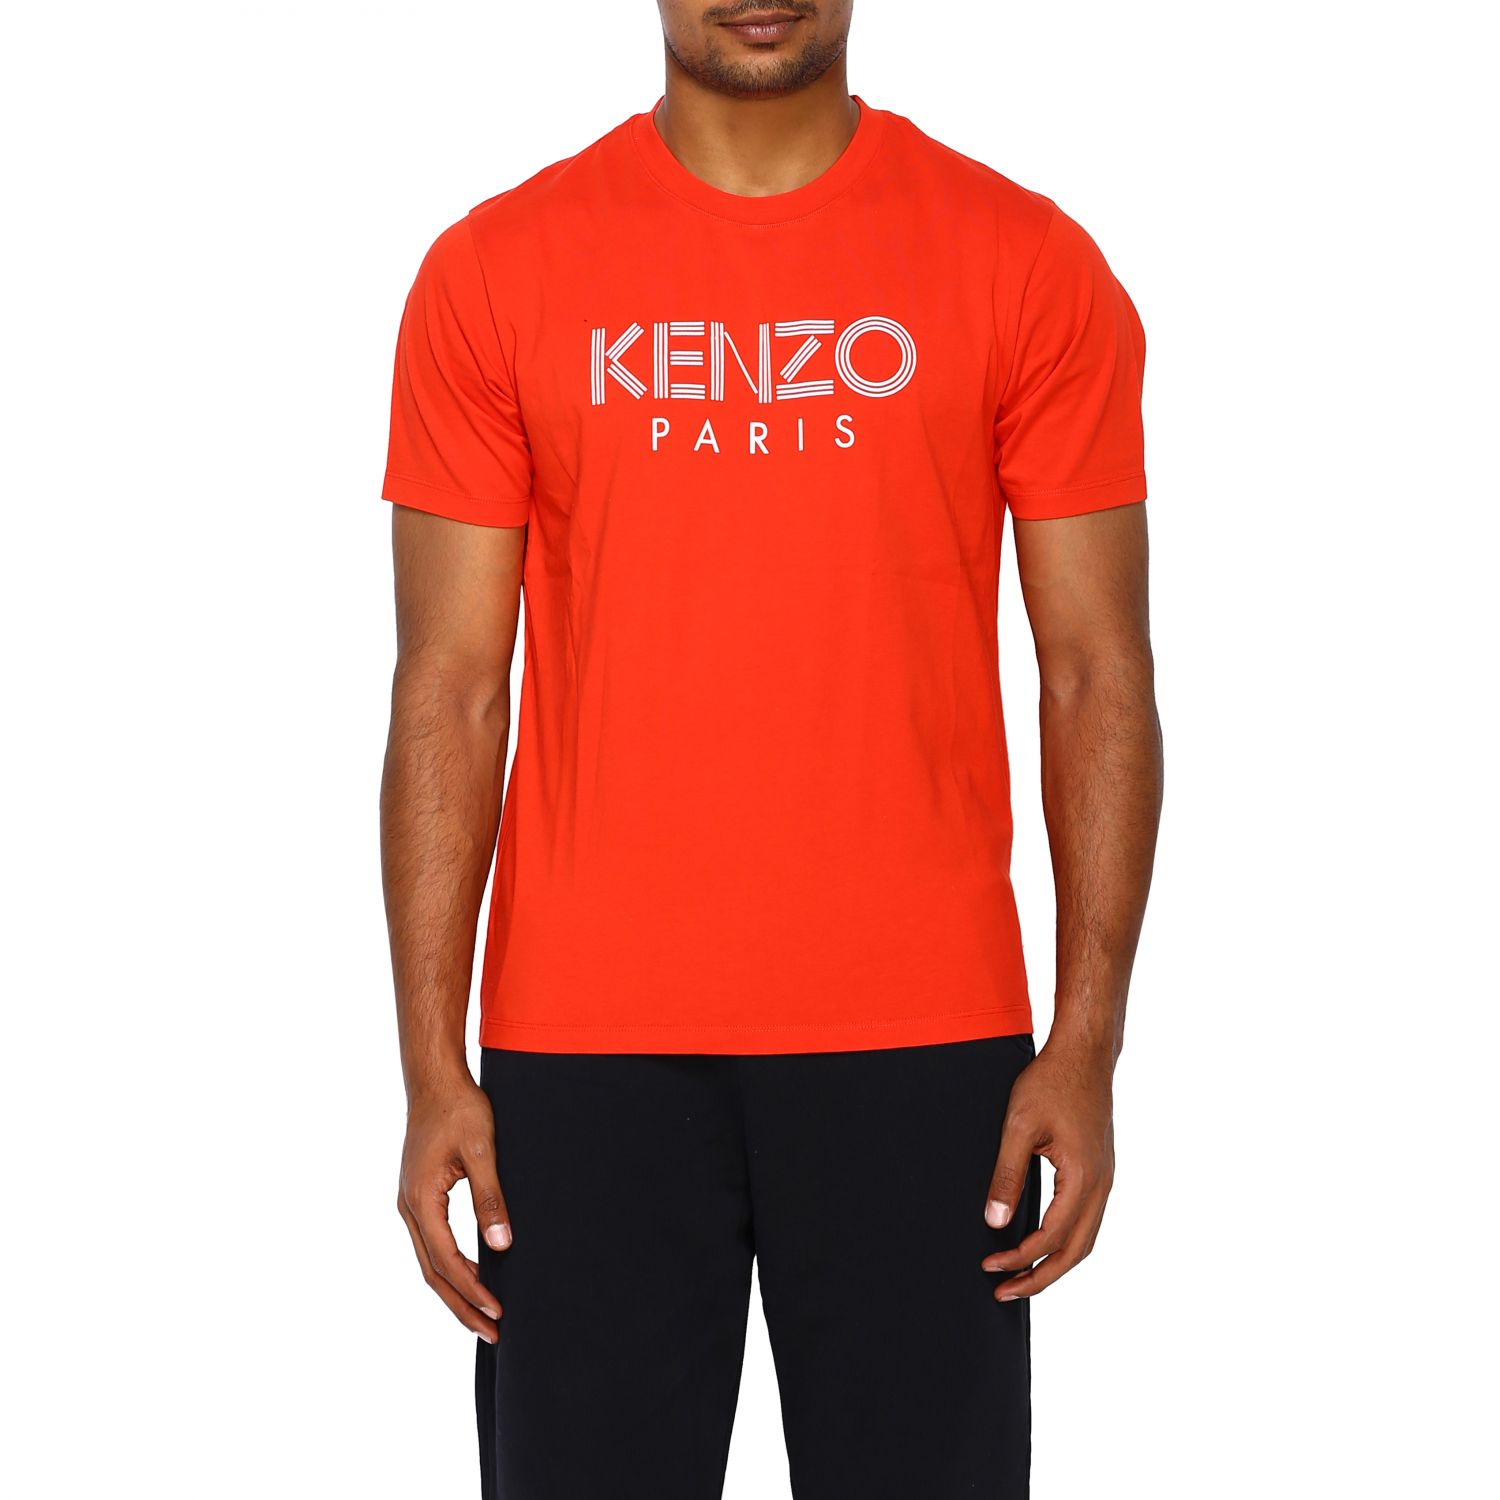 kenzo red top